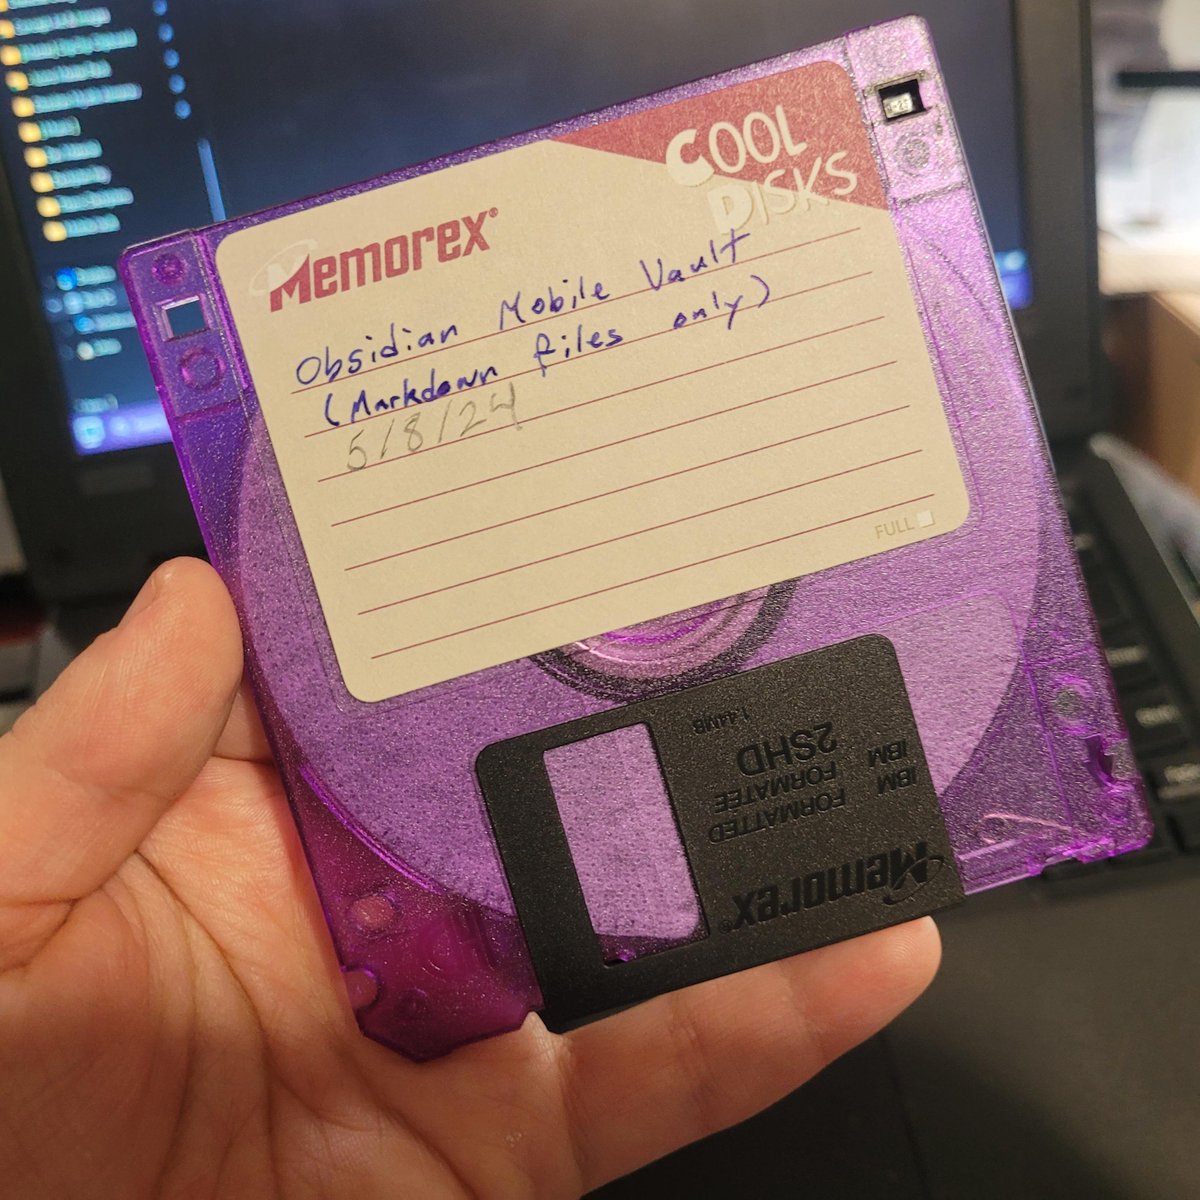 yes, you can put your @obsdmd notes on a floppy disk and read them on an old computer 🤗 (via SilverNarifia on Reddit)